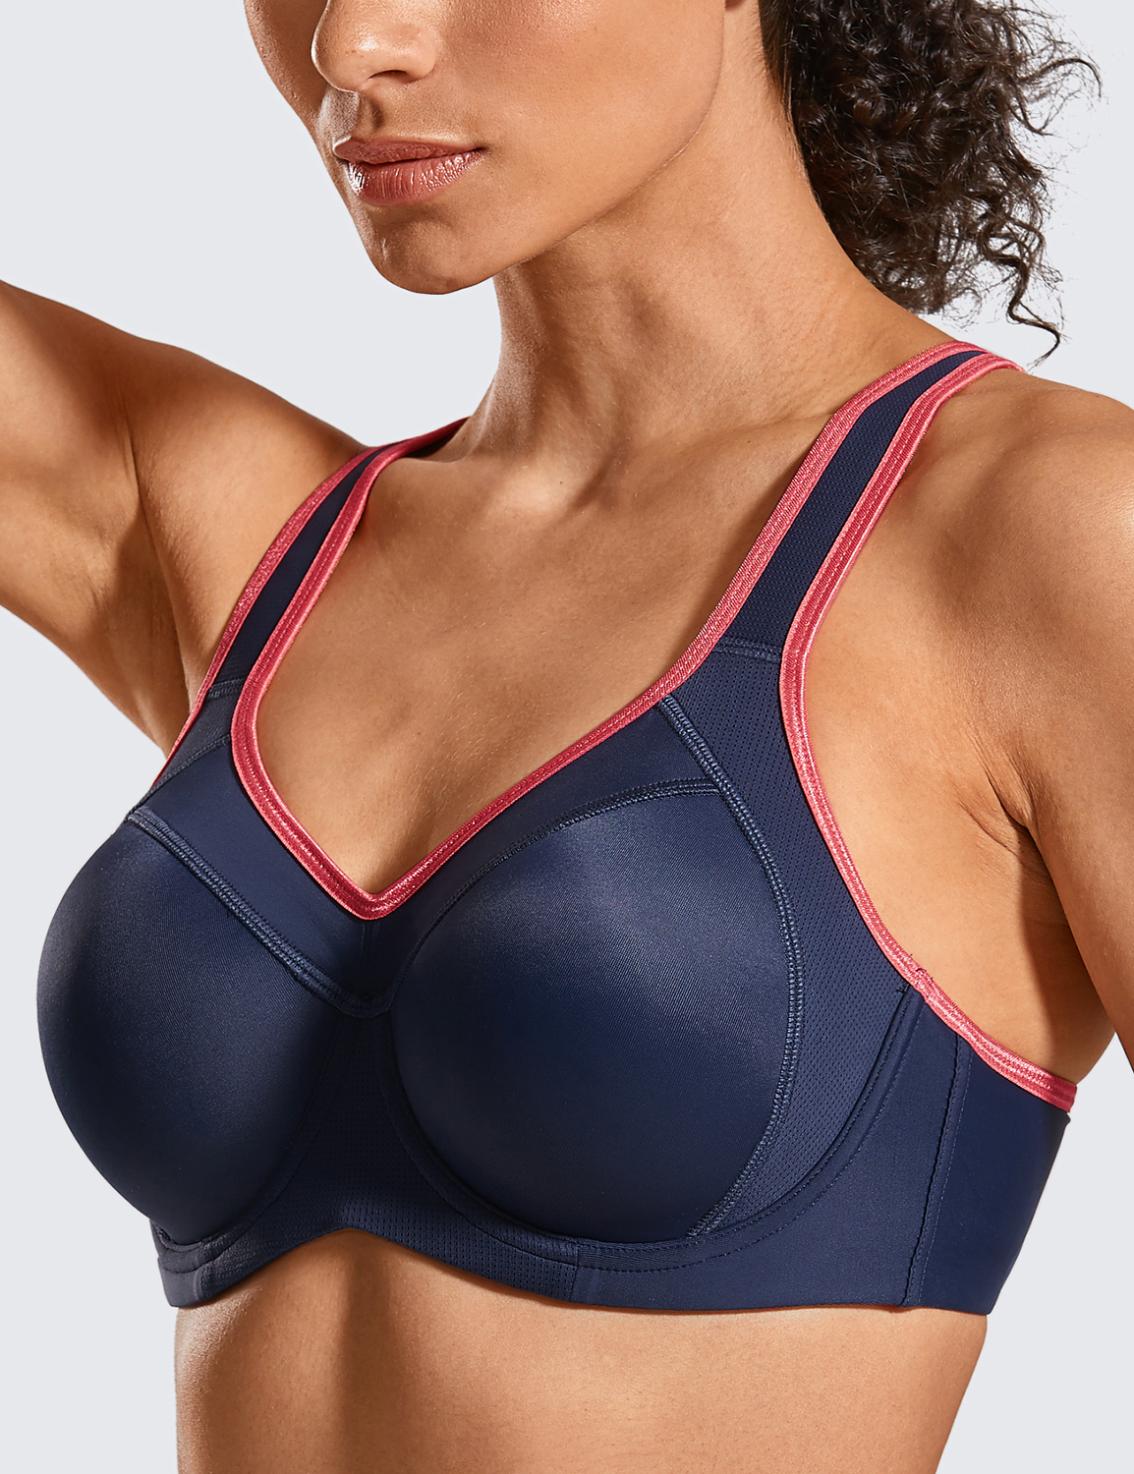 What Are Some Common Mistakes People Make When Choosing a Sports Bra?